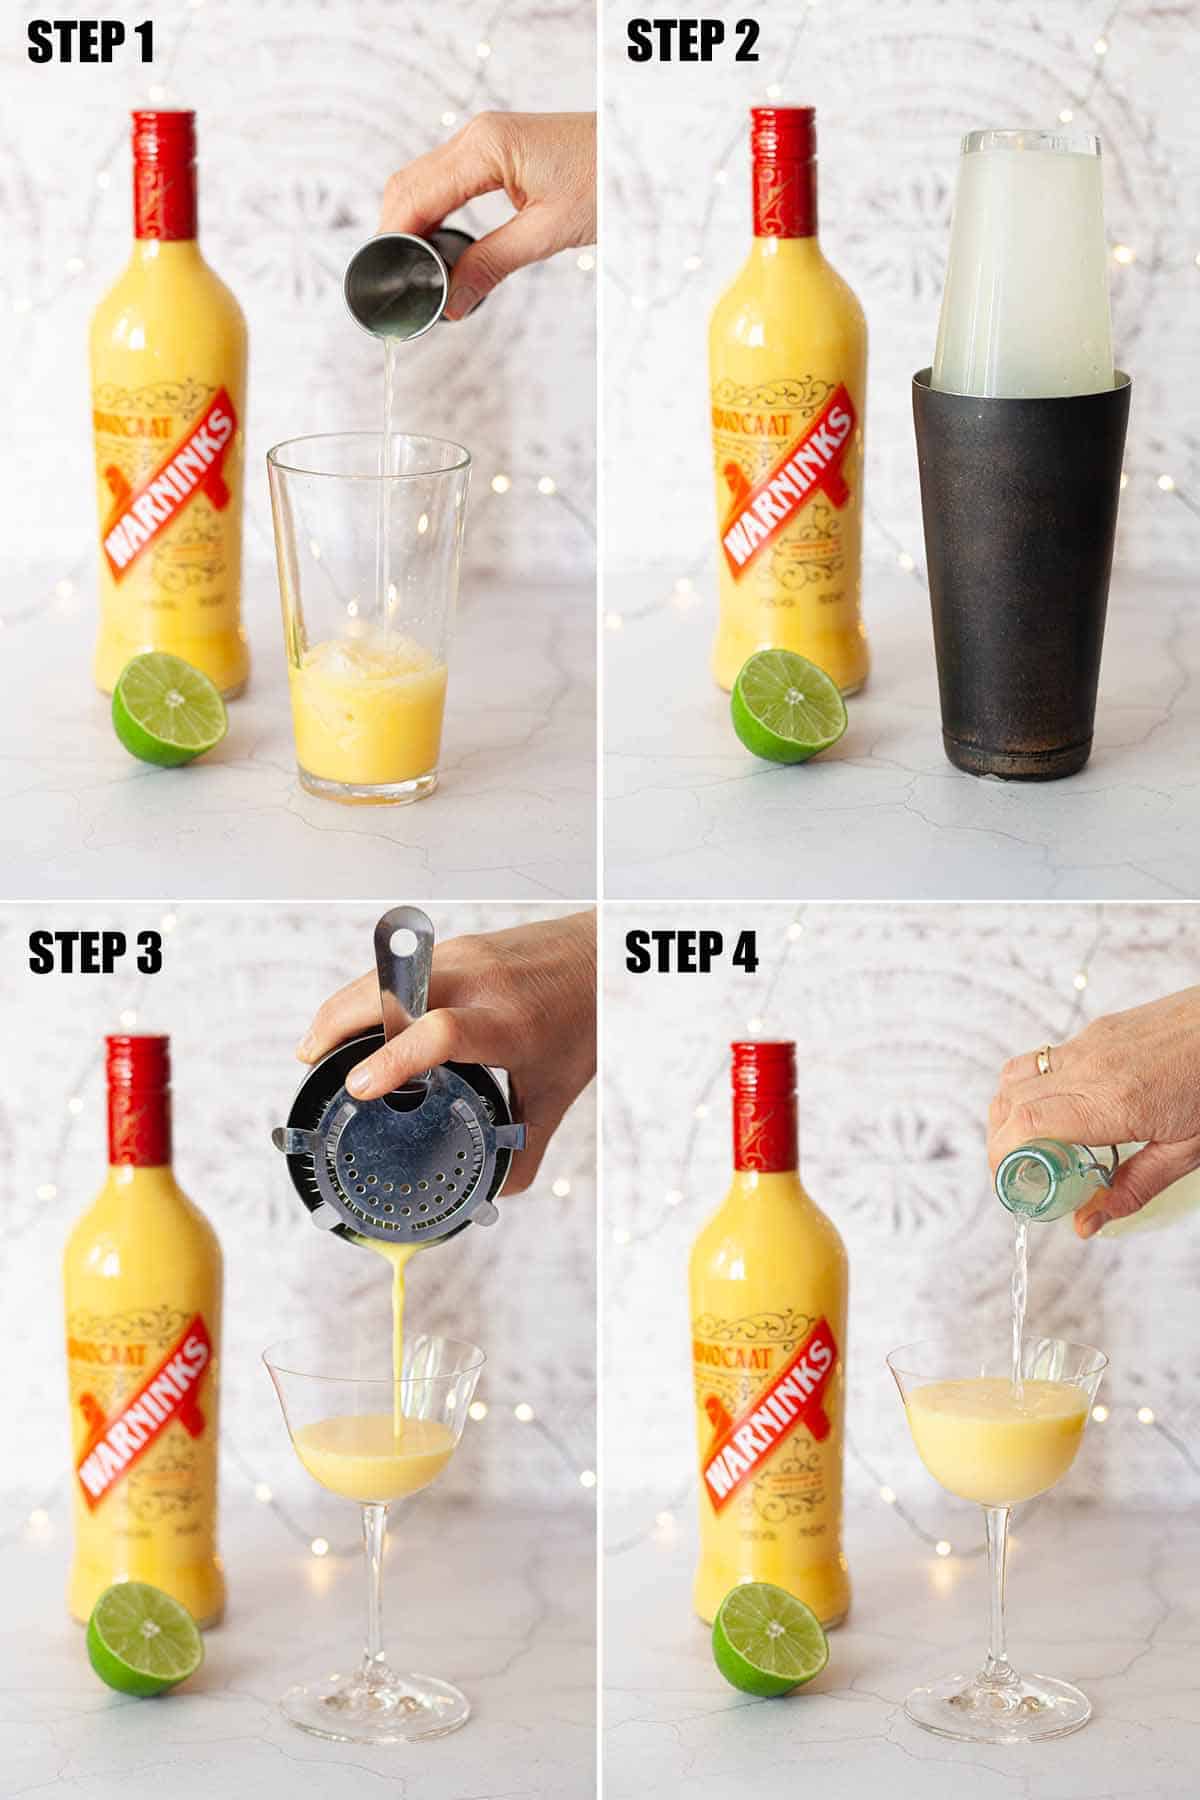 Collage of images showing a yellow alcoholic drink being made.